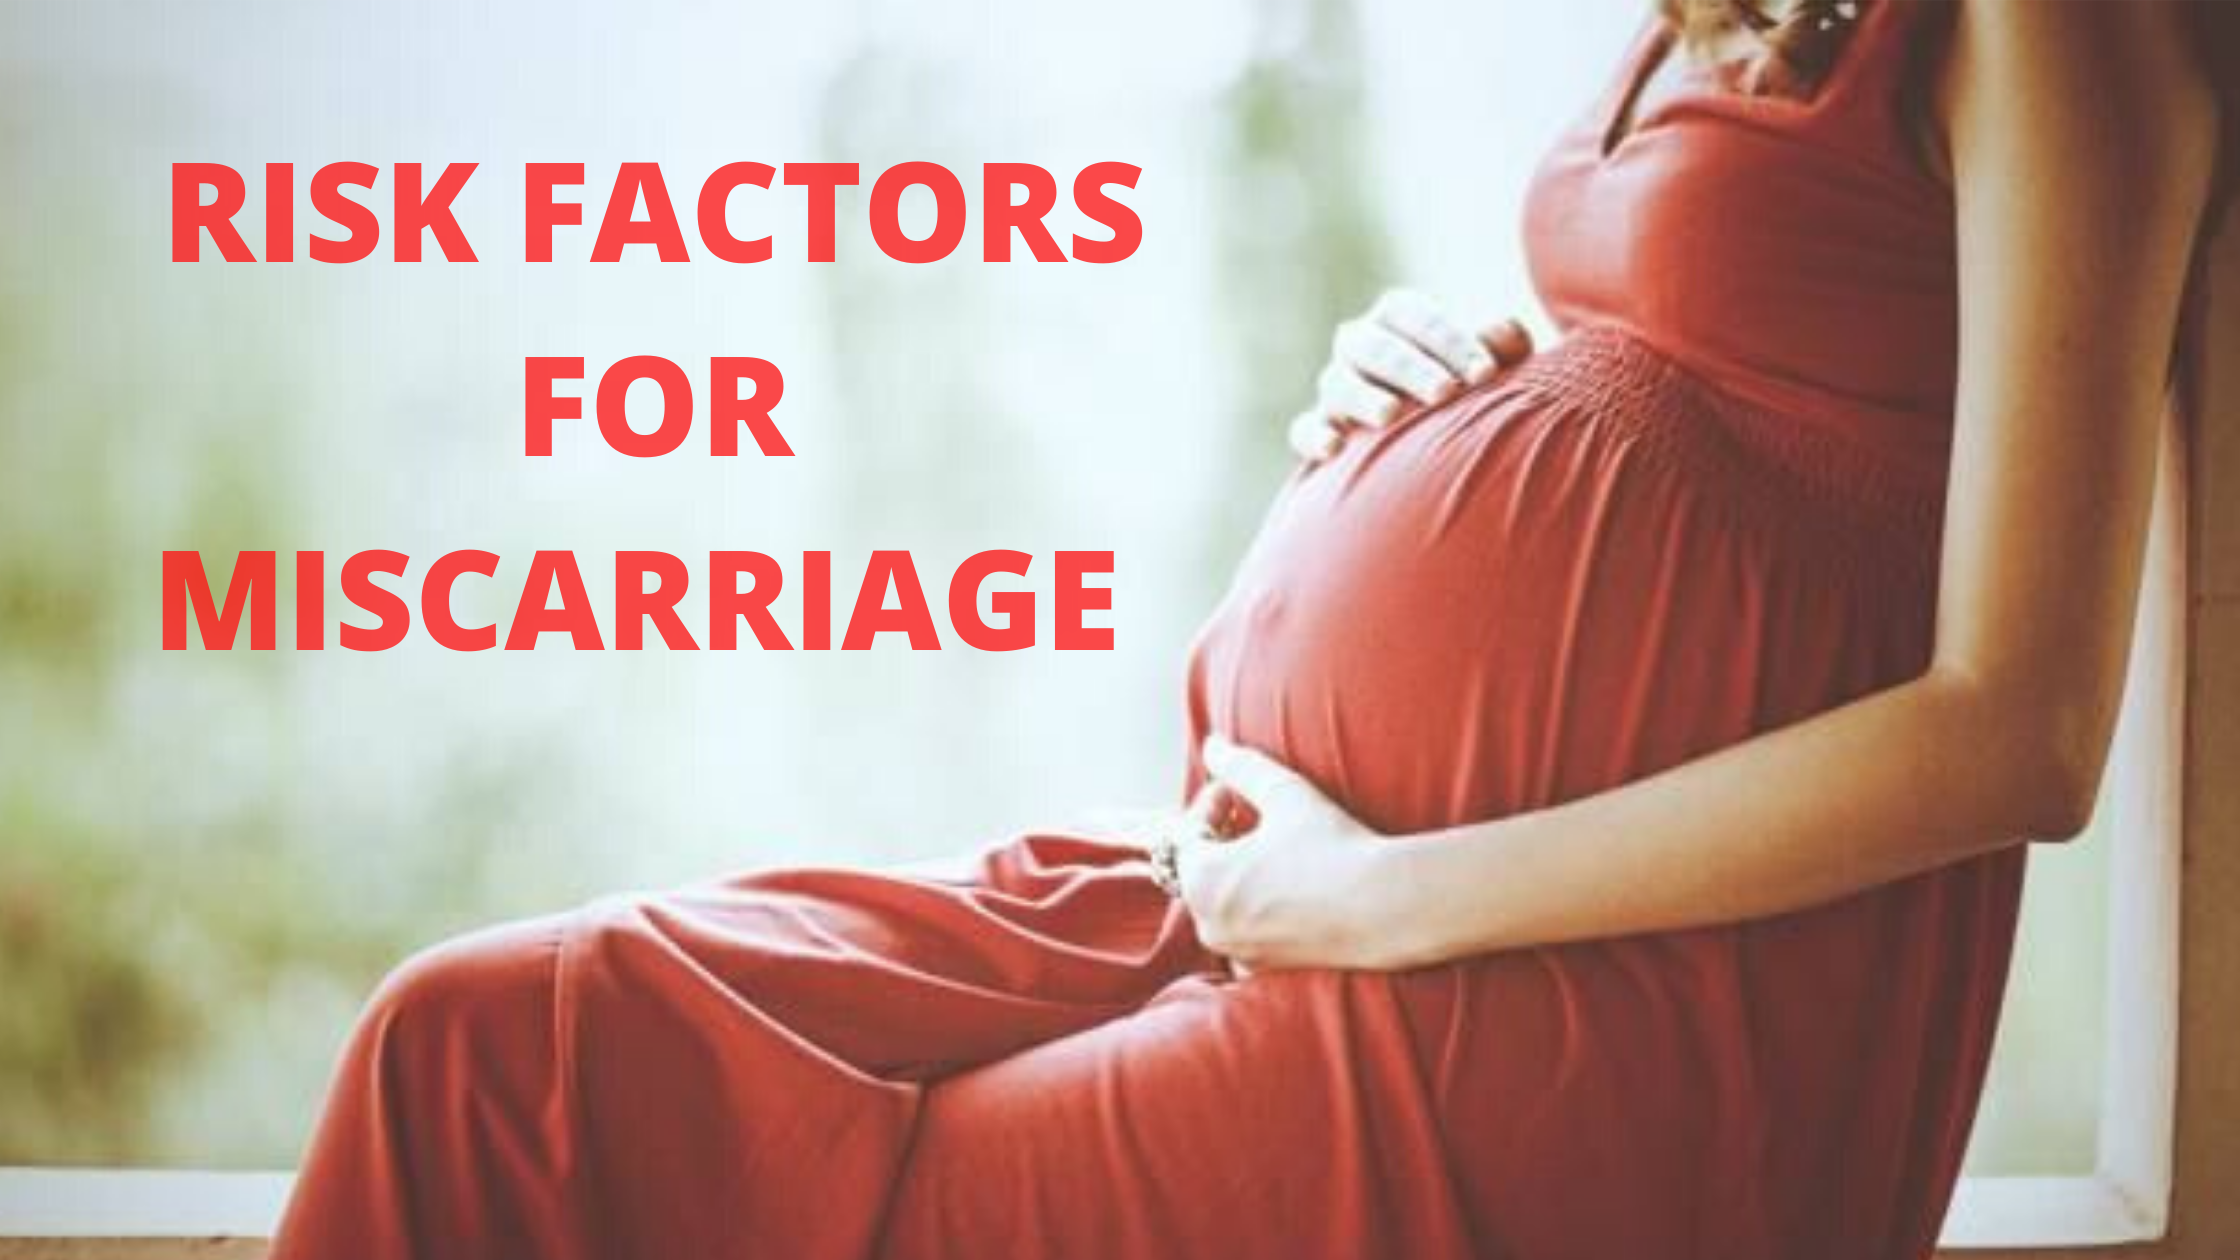 Risk factors for miscarriage